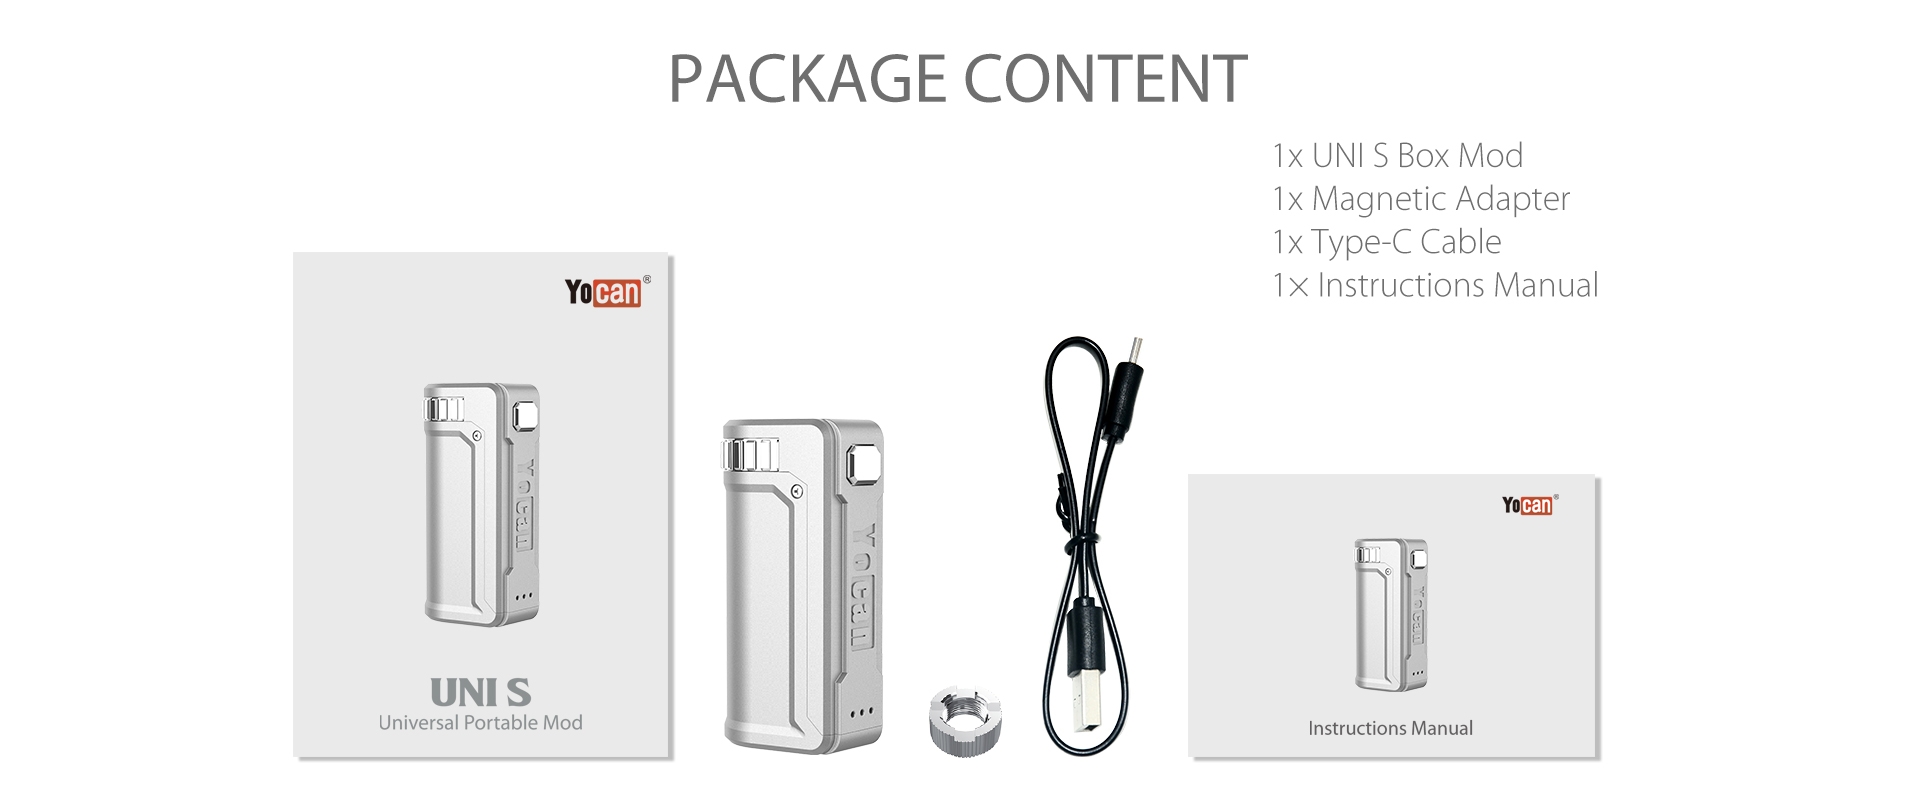 Yocan UNI S Box Mod Package Content.